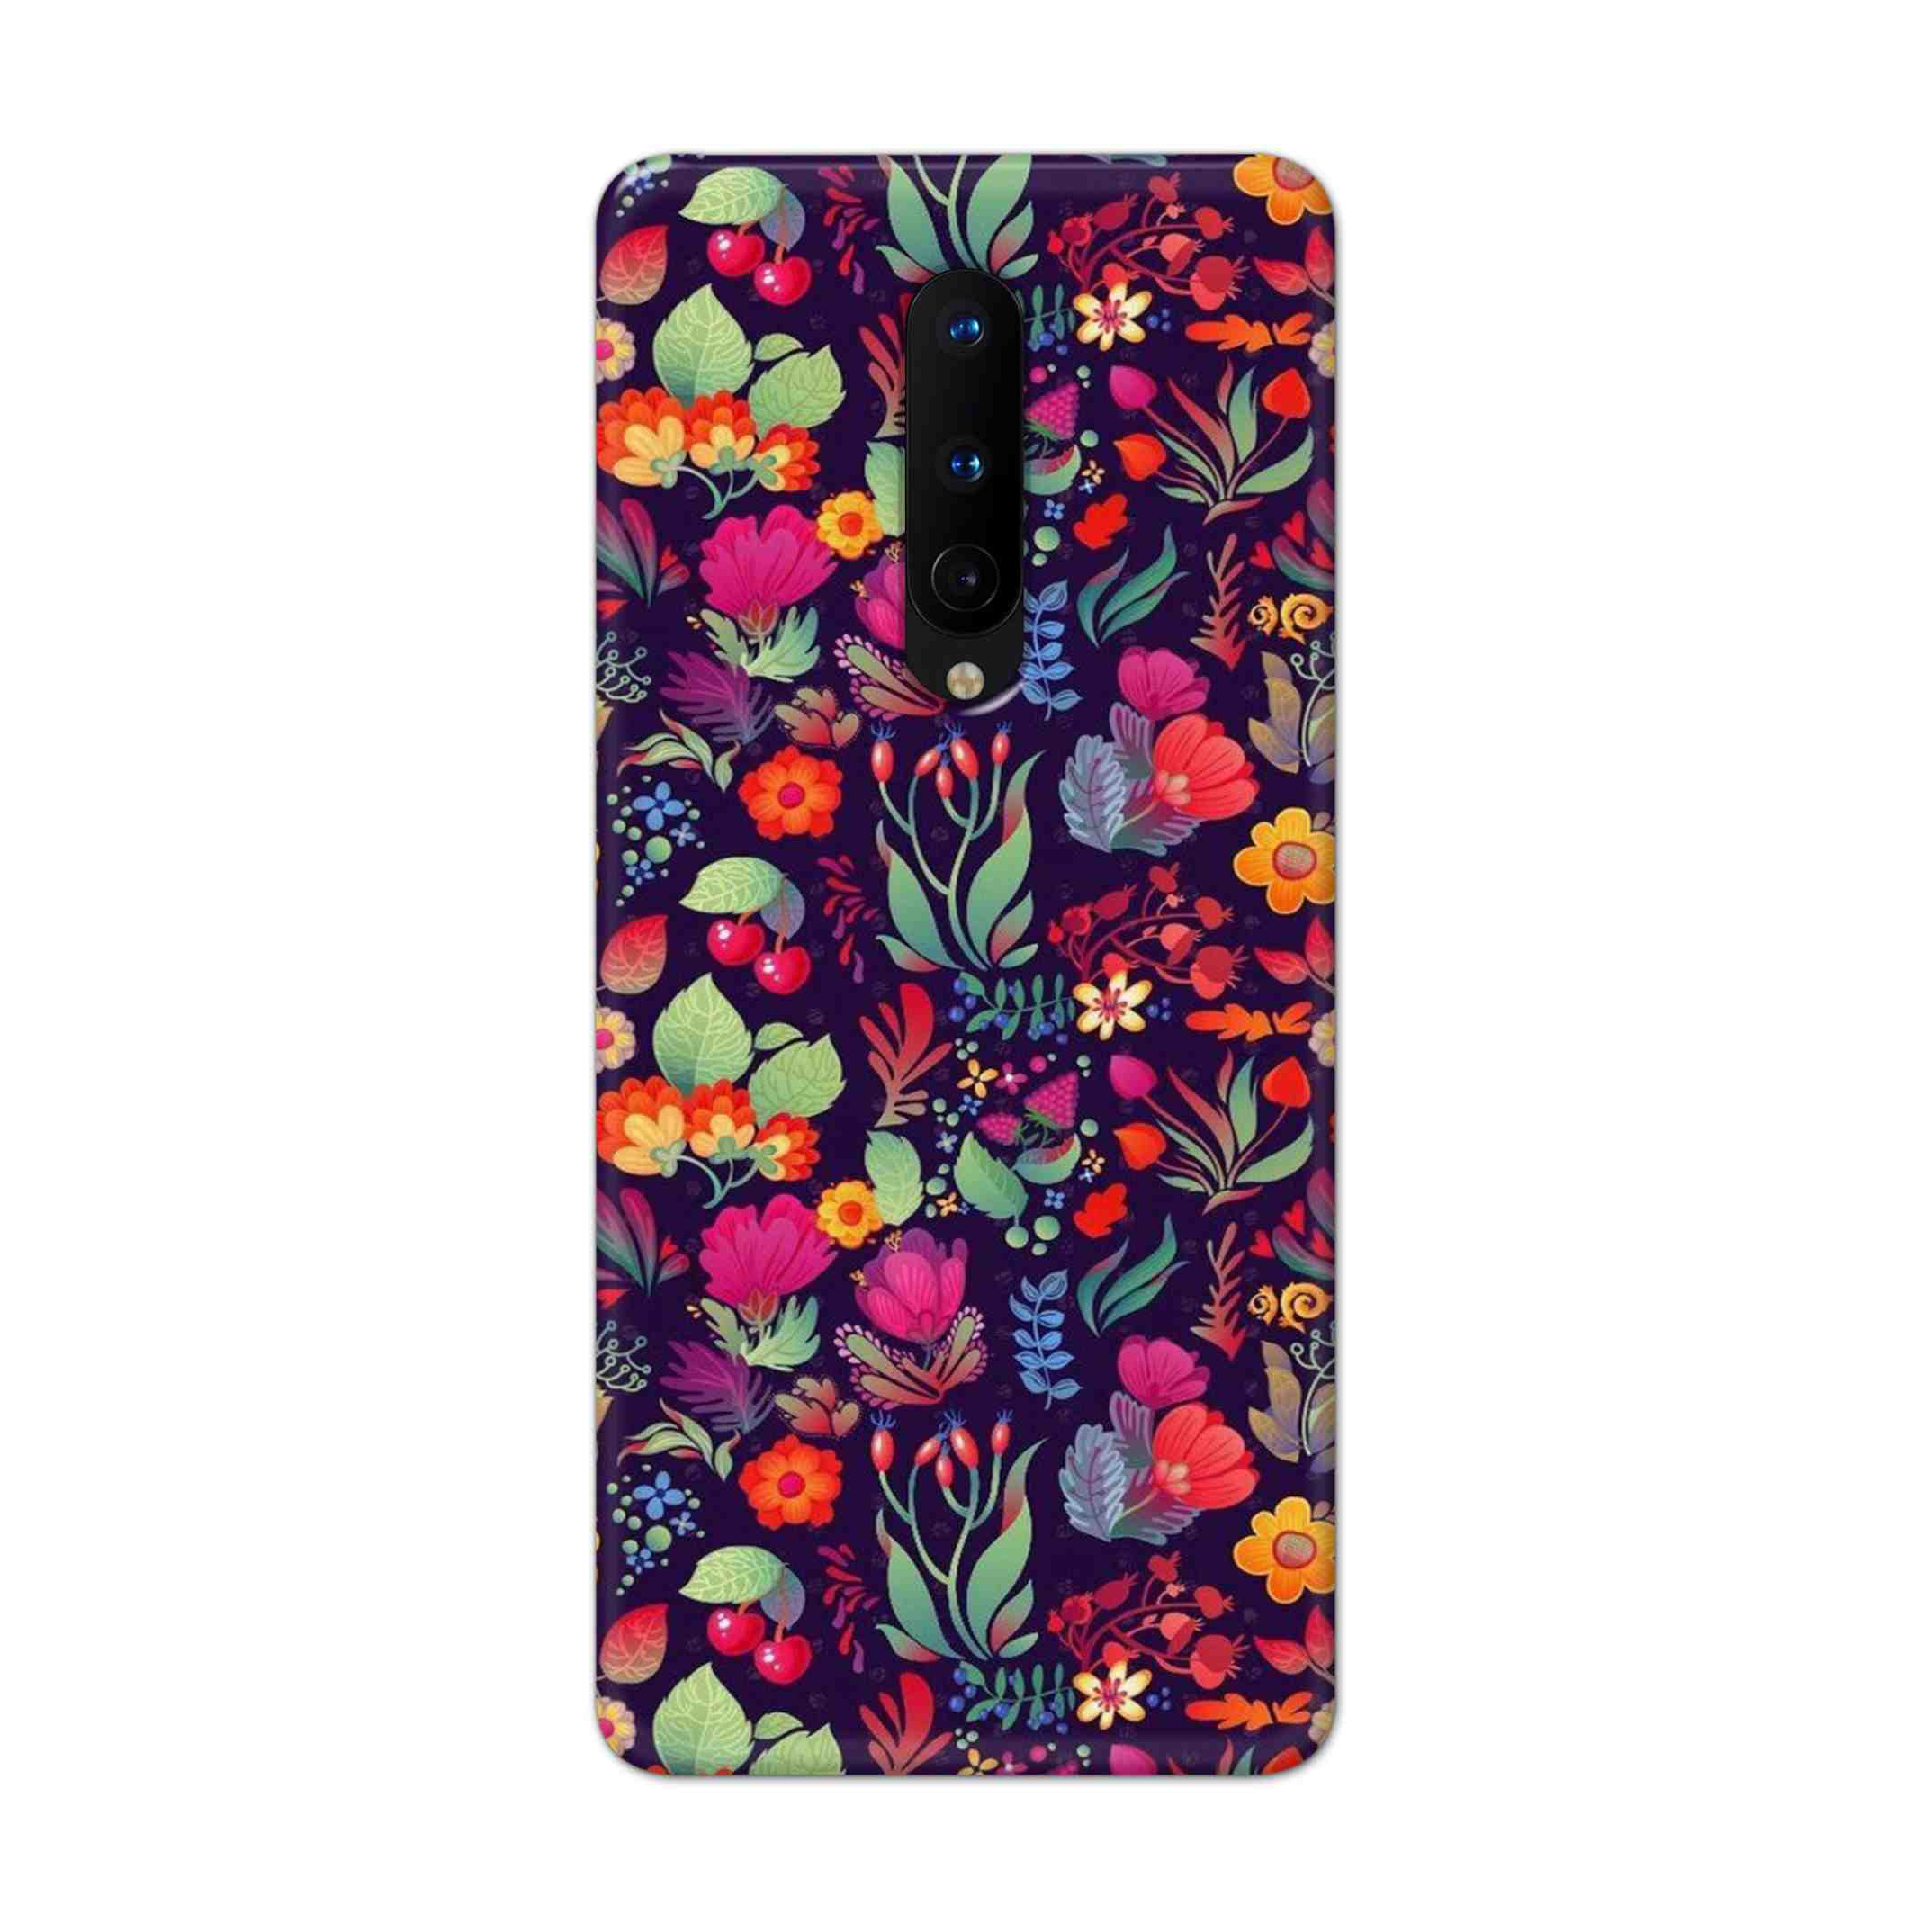 Buy Fruits Flower Hard Back Mobile Phone Case Cover For OnePlus 8 Online